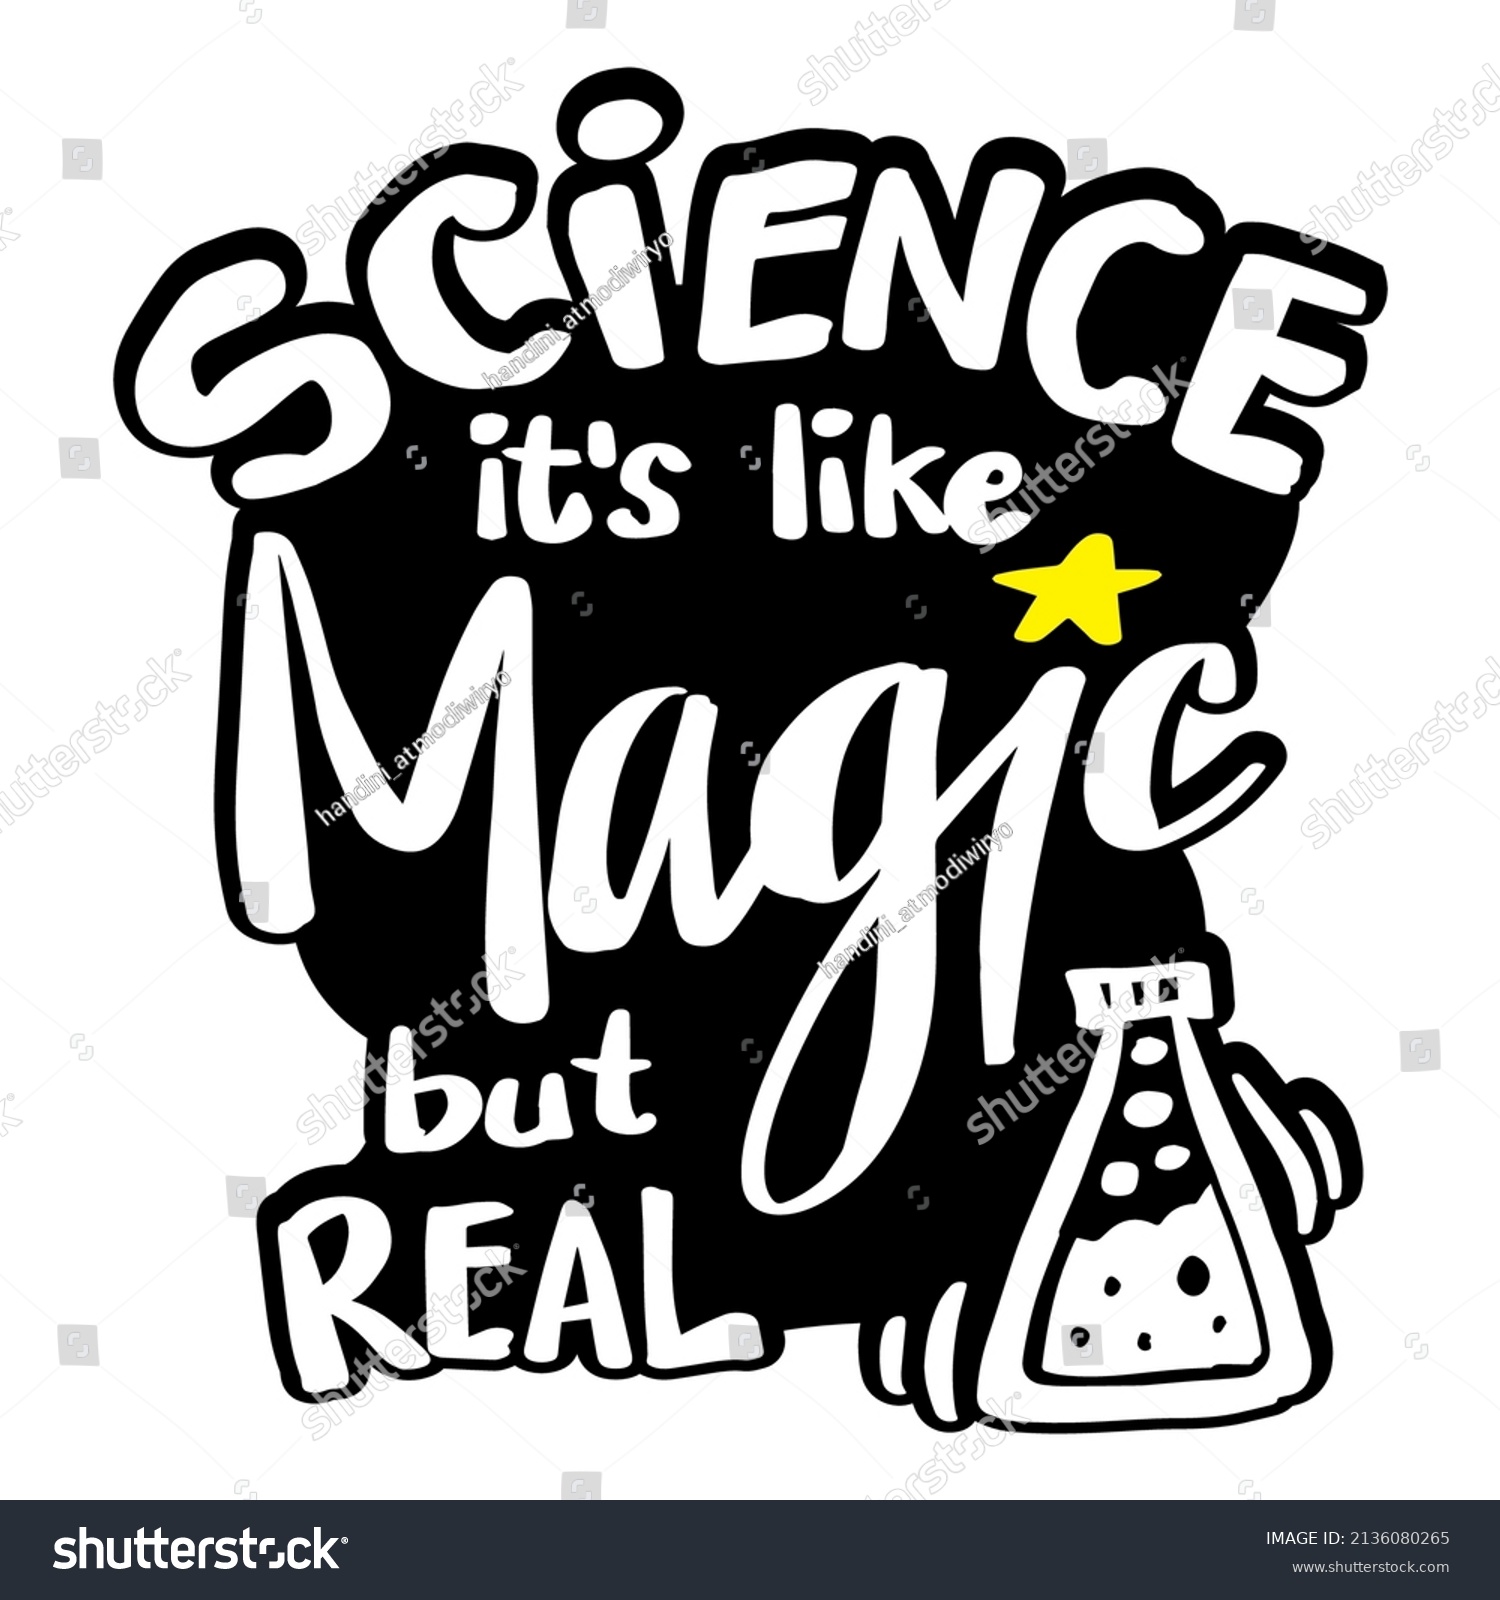 Science Like Magic Real Science Quotes Stock Vector (Royalty Free ...